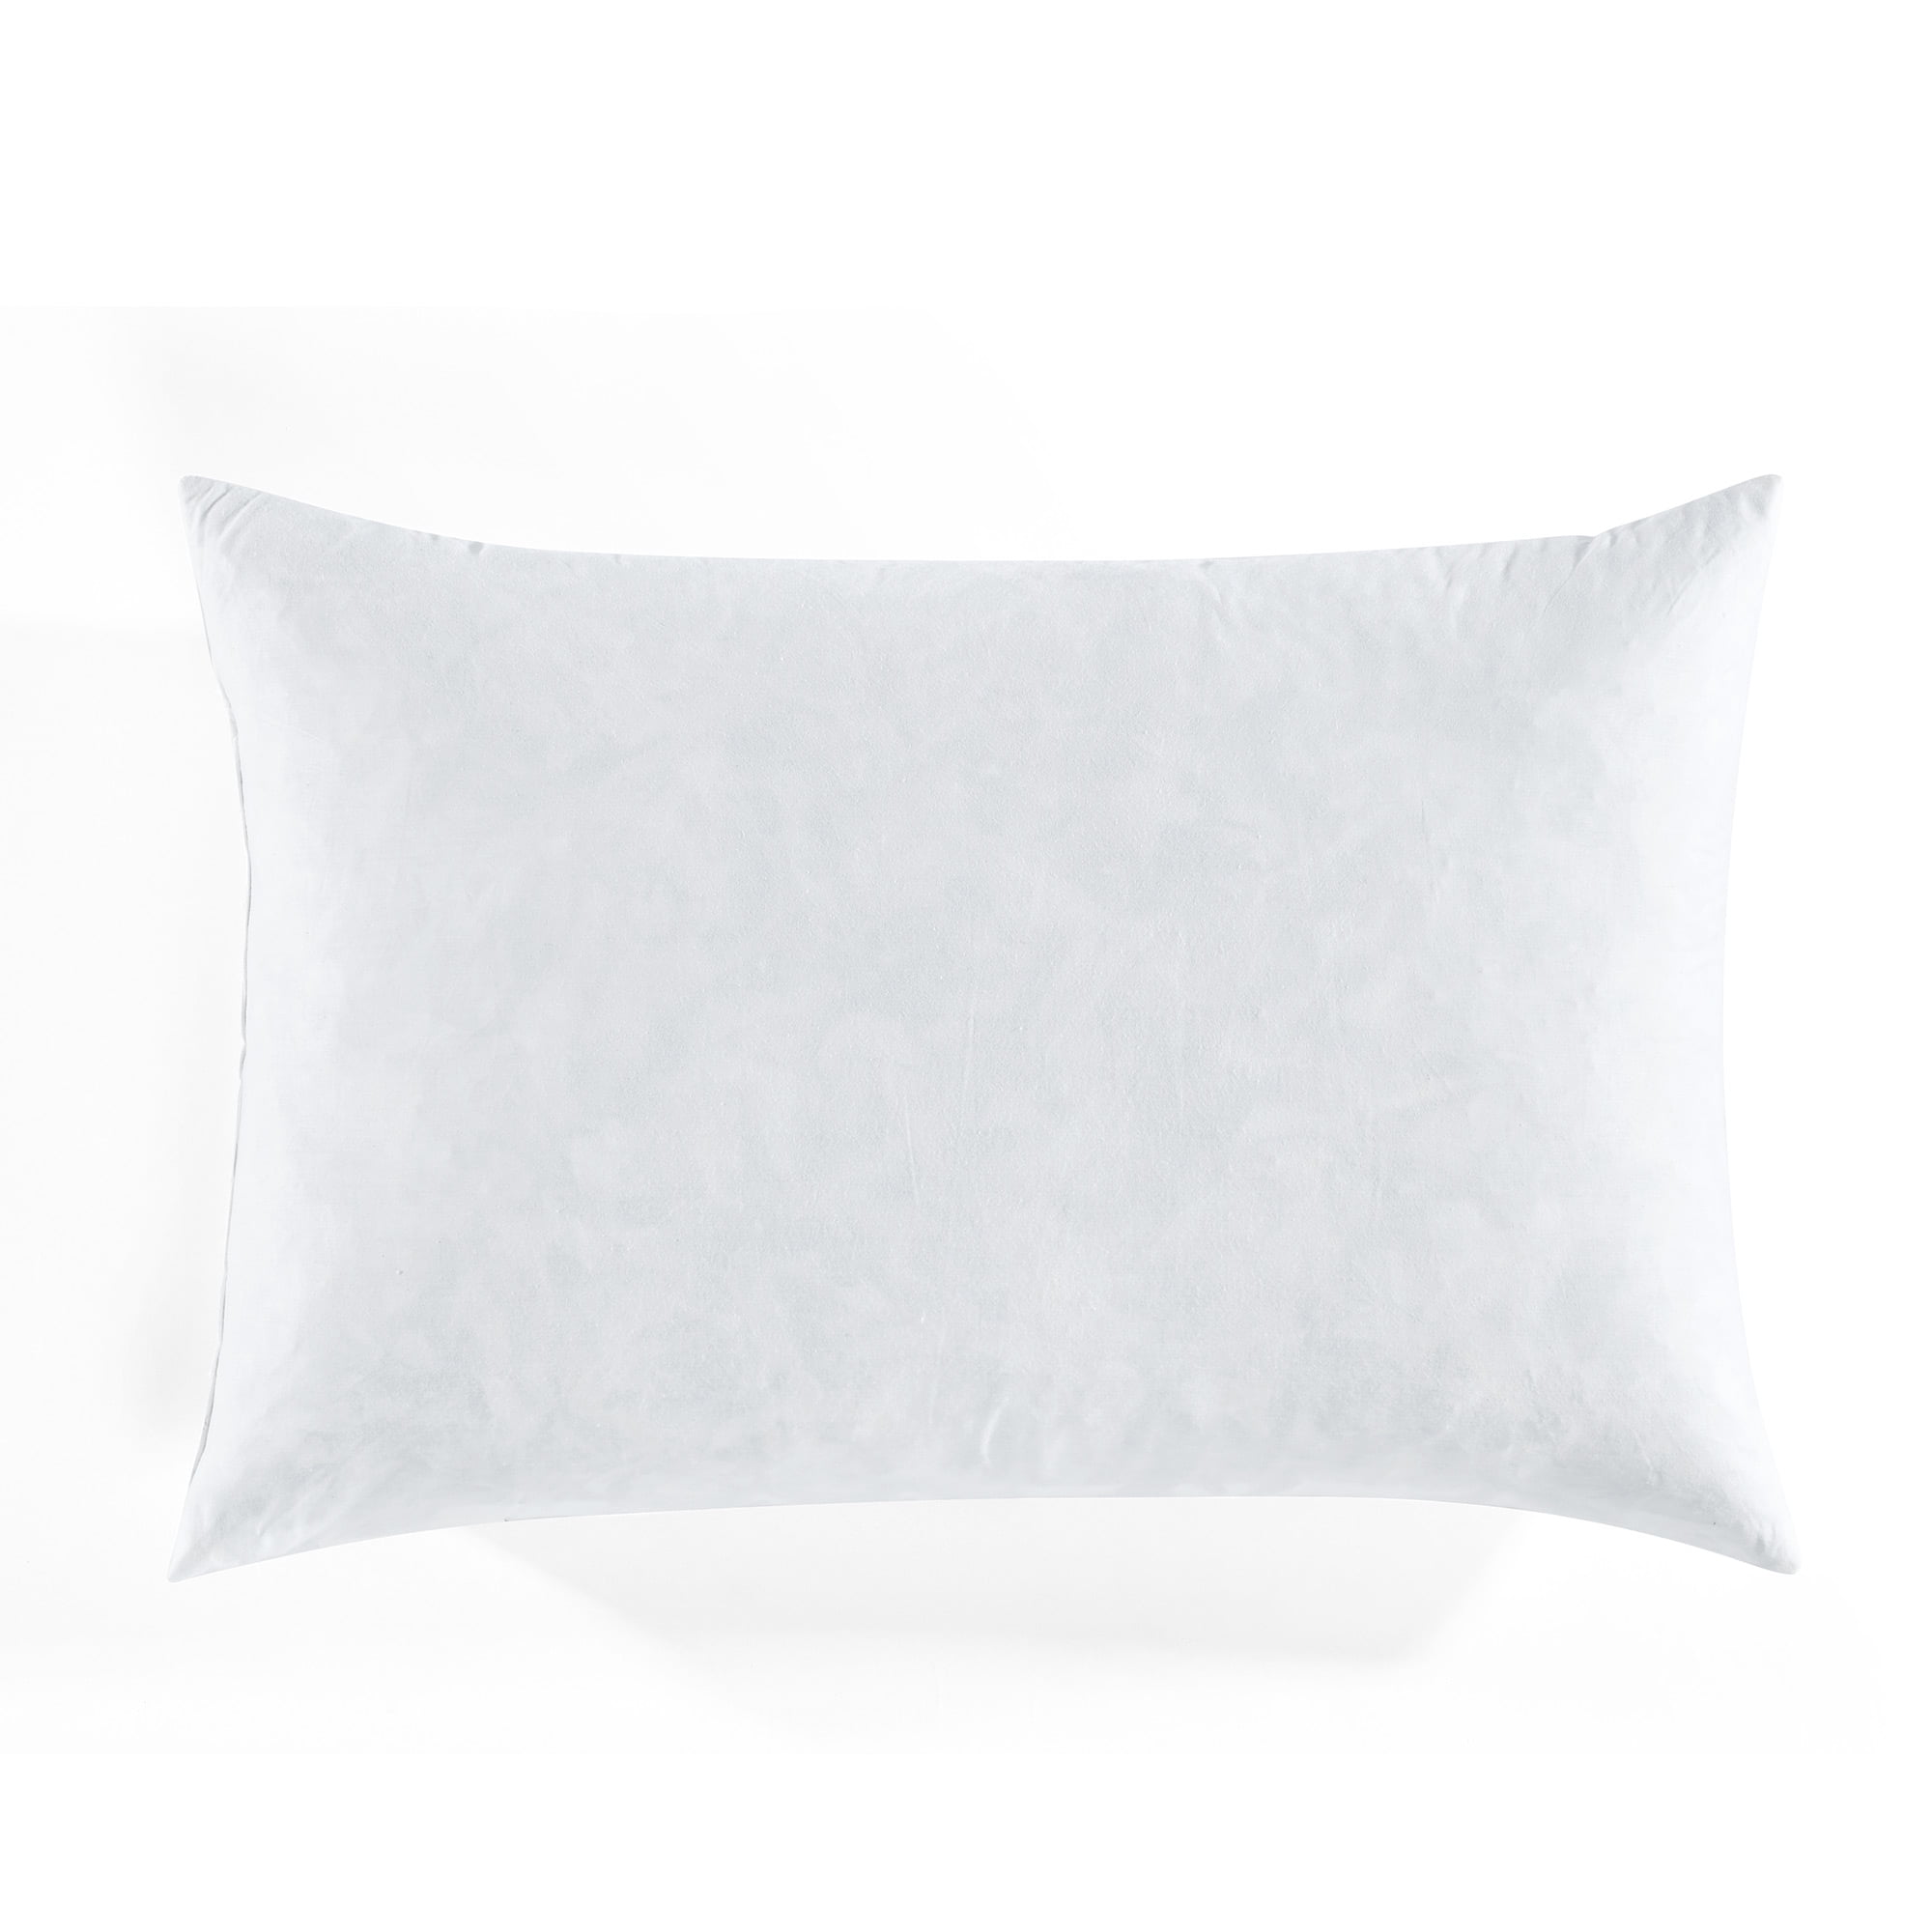 Mr and Mrs 14x21 Pillow